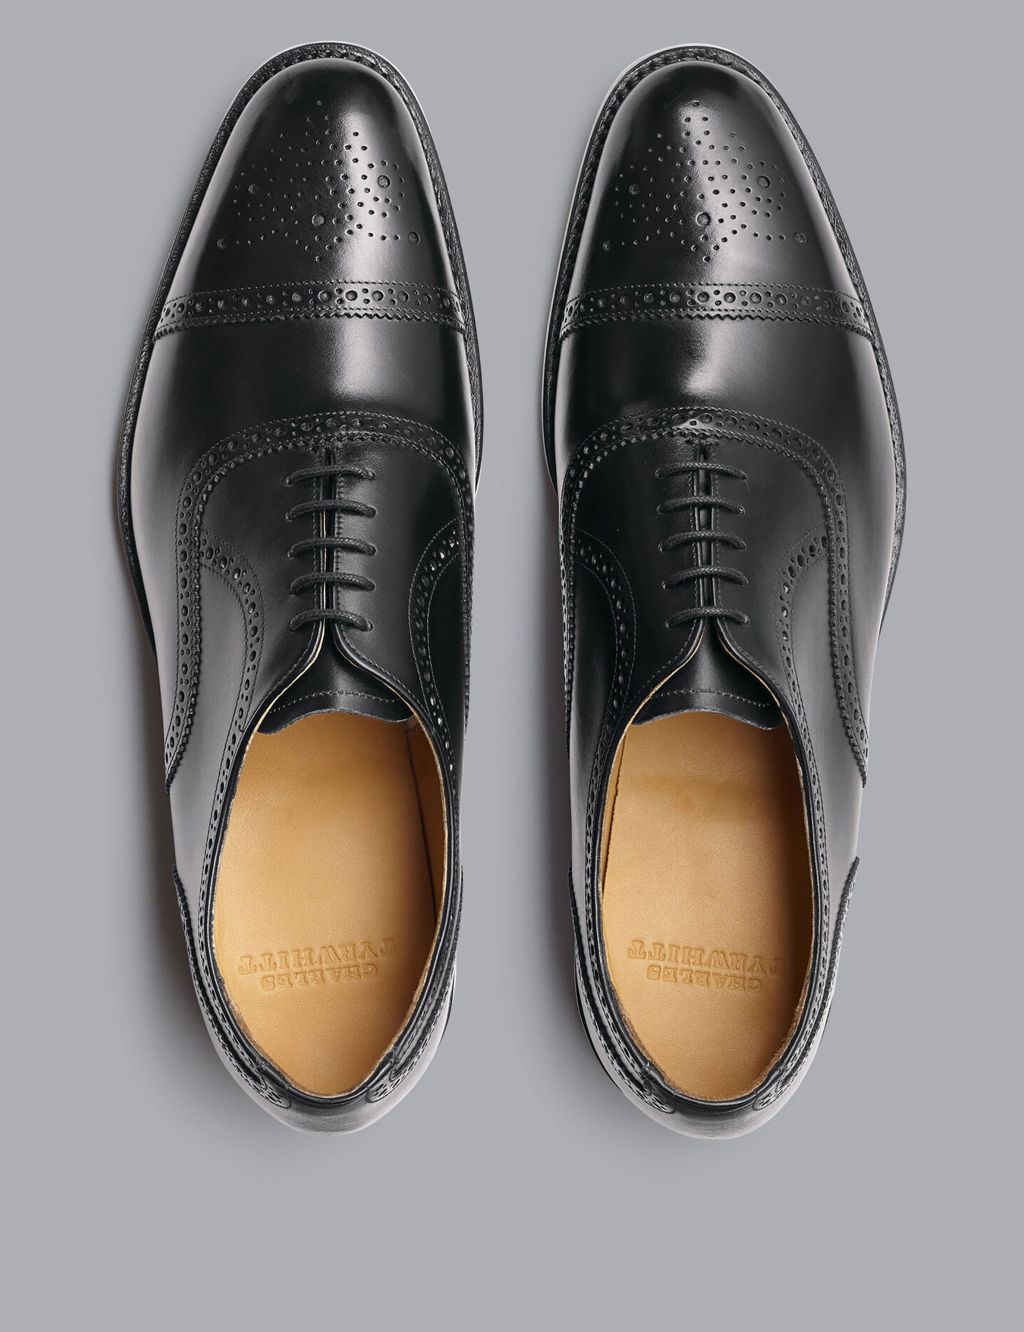 Leather Oxford Shoes image 2